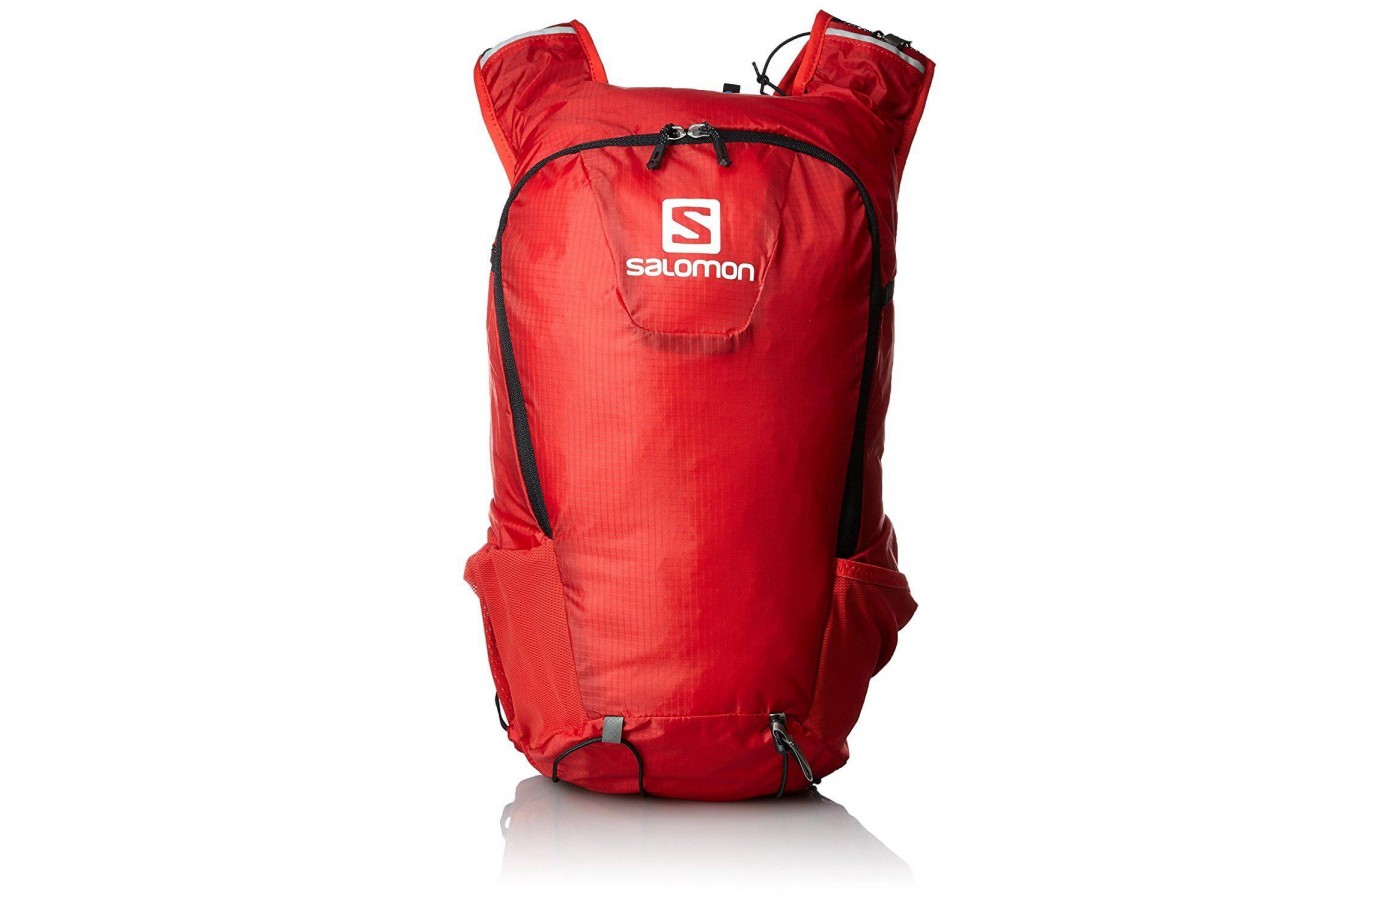 The Salomon Skin Pro 15 is a backpack for hiking on trails